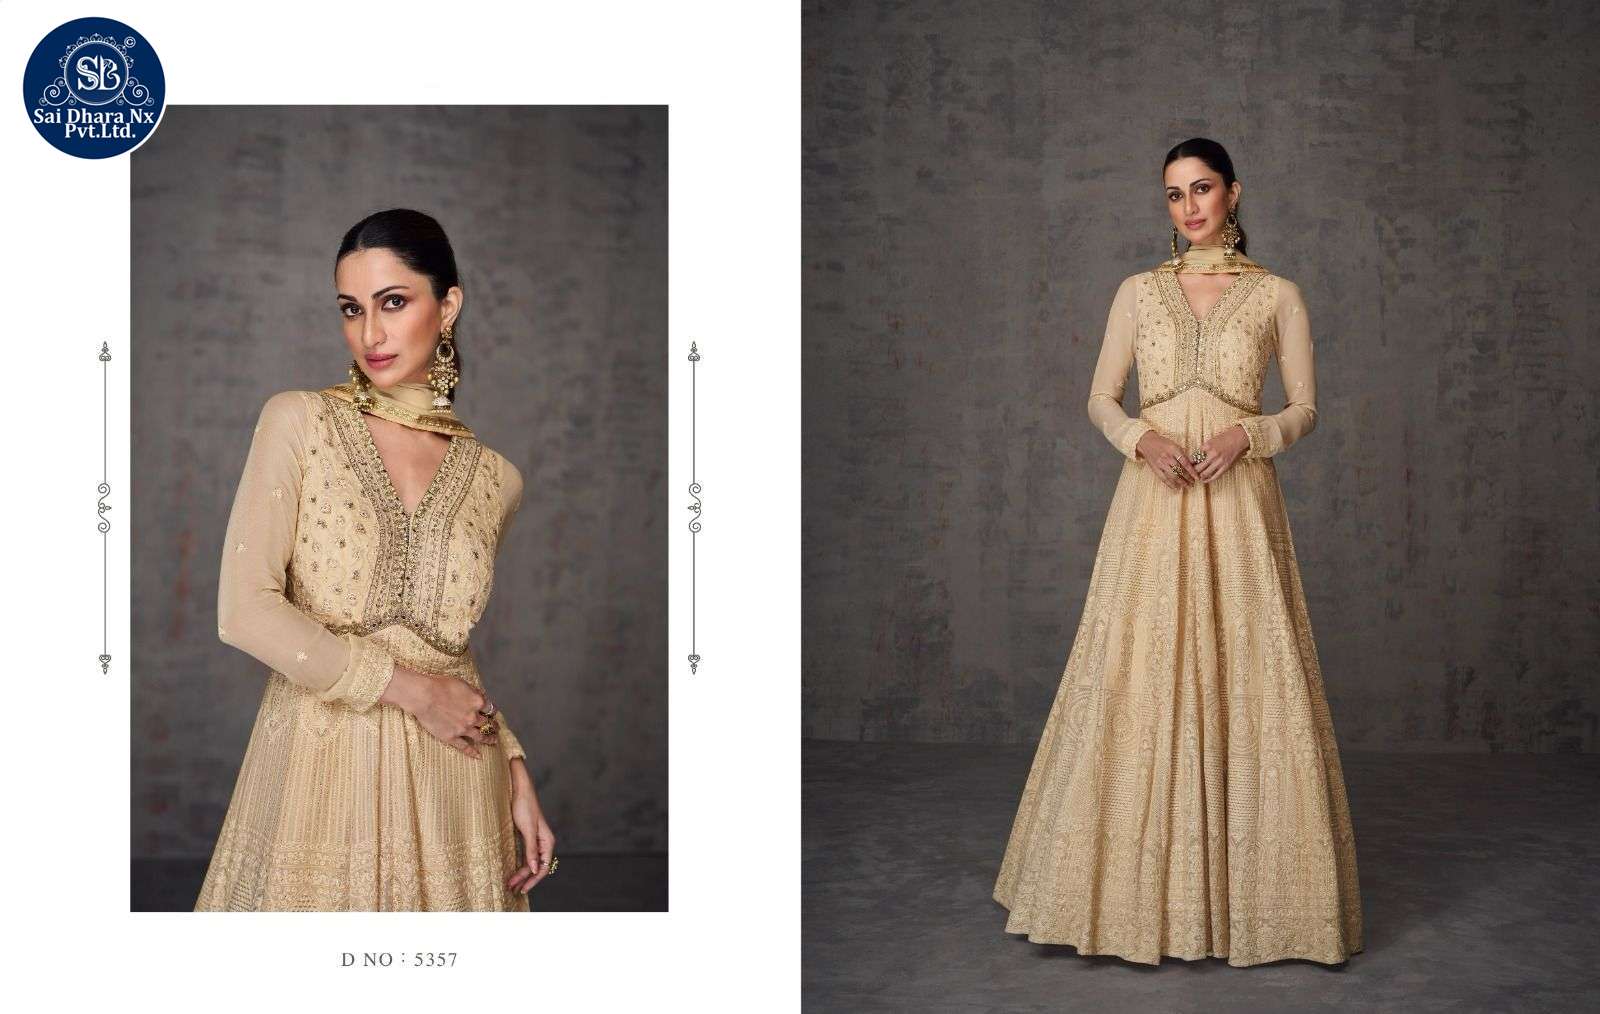 SAYURI DESIGNER PRESENTS REAL GEORGETTE BASED GOWN WITH DUPATTA WHOLESALE SHOP IN SURAT - SaiDharaNx